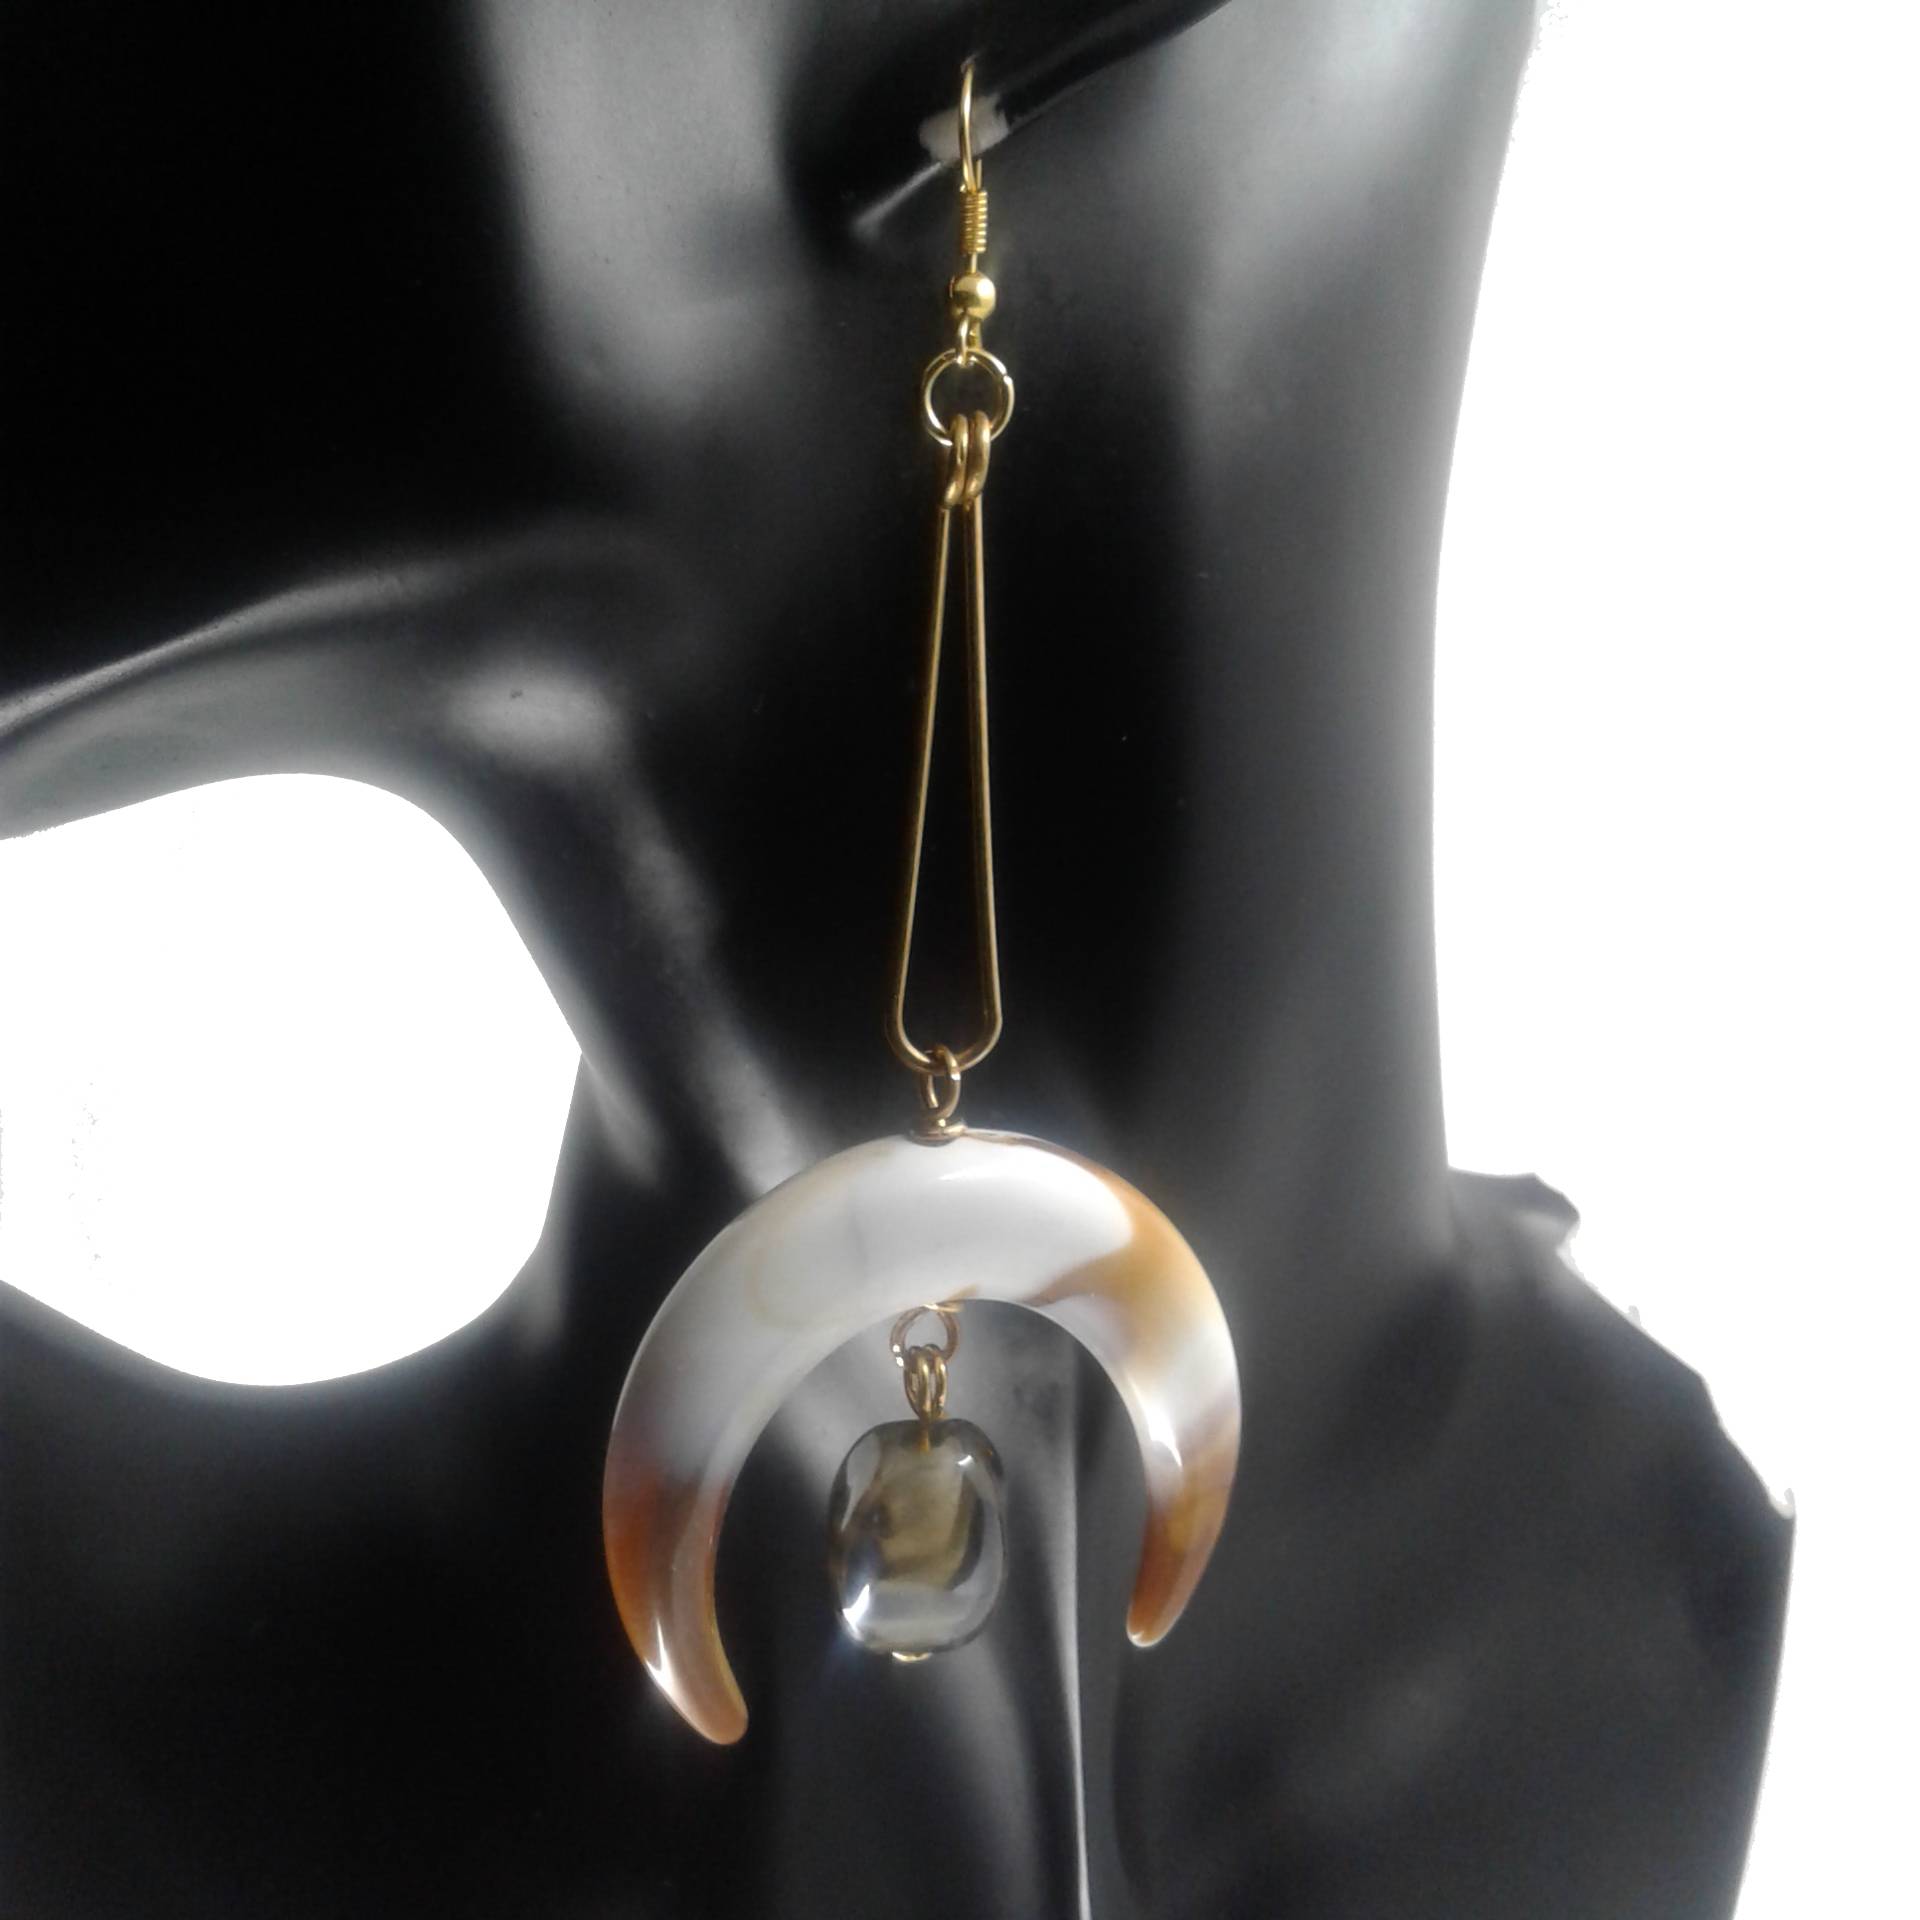 Handmade statement earrings using cow horn and gray beads